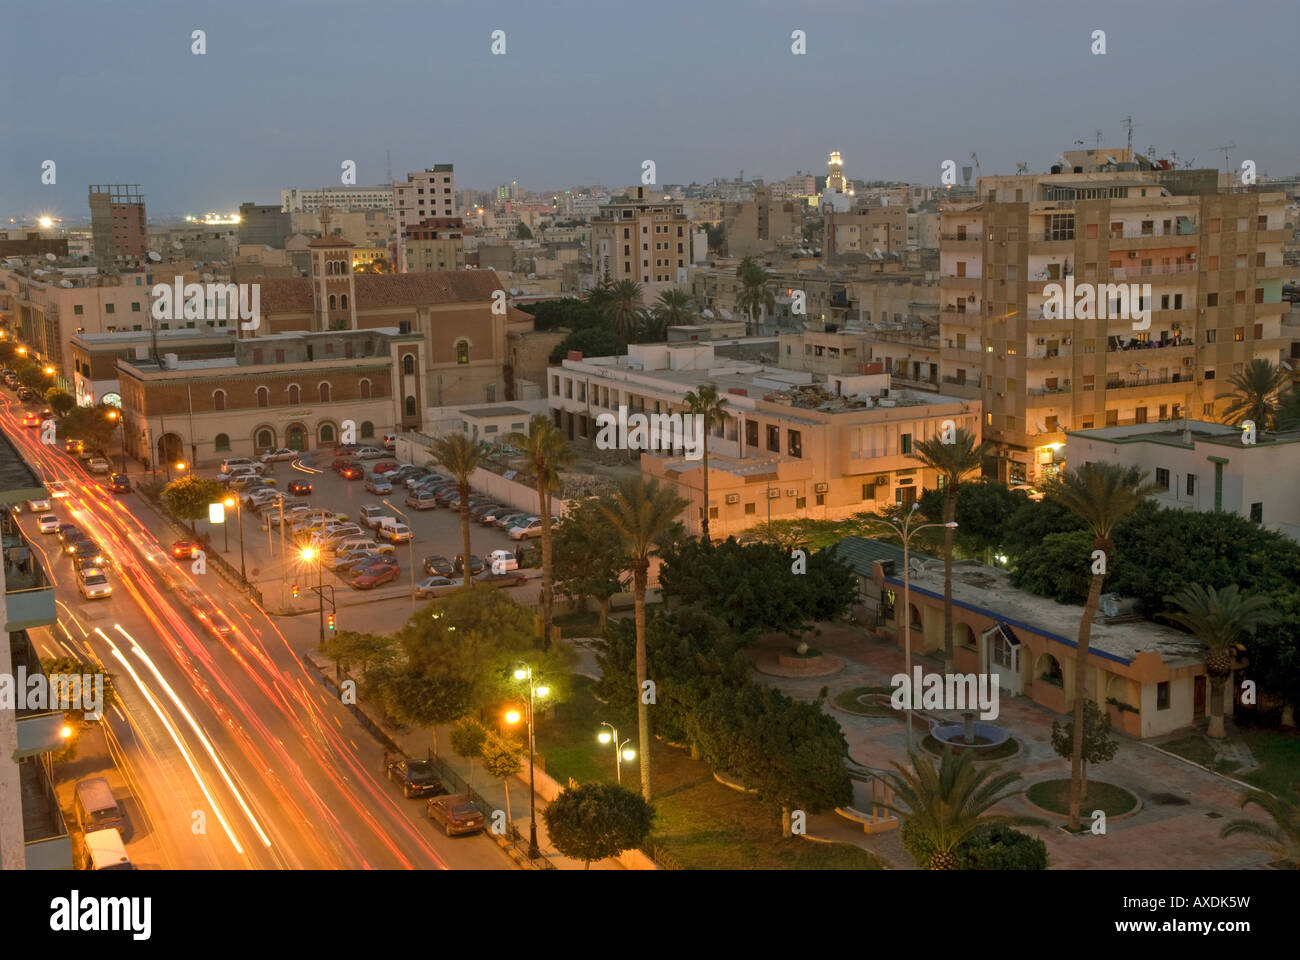 General view of the city of Tripoli by night, Libya Stock Photo